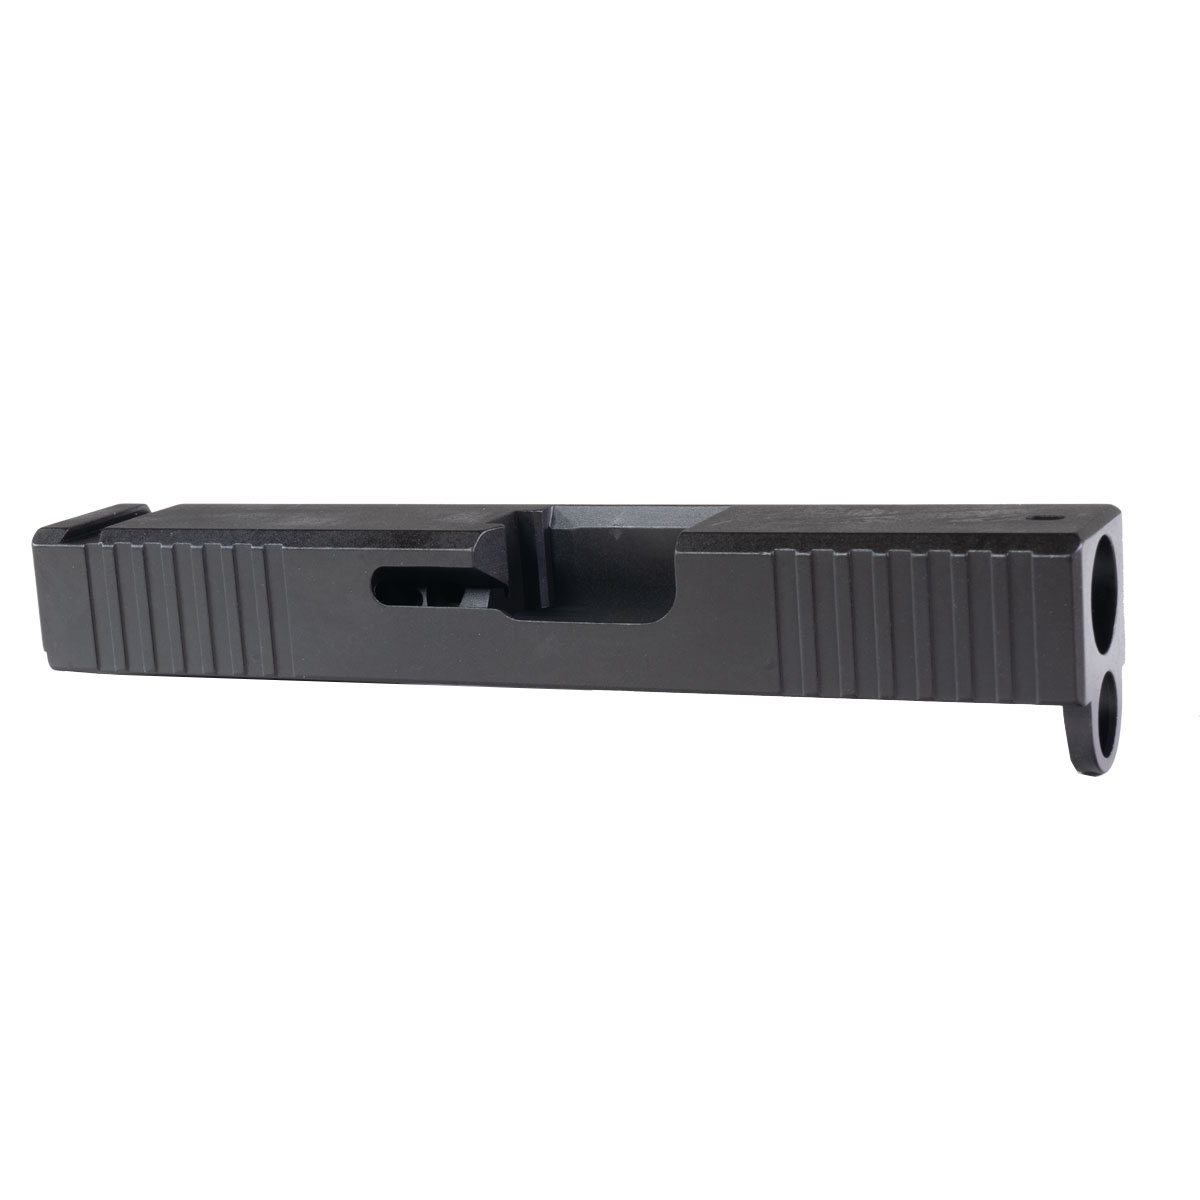 Patmos Arms Judah 26 - Subcompact Slide - Gen3 G26 416 Heat Treated Stainless Steel Nitride Finish